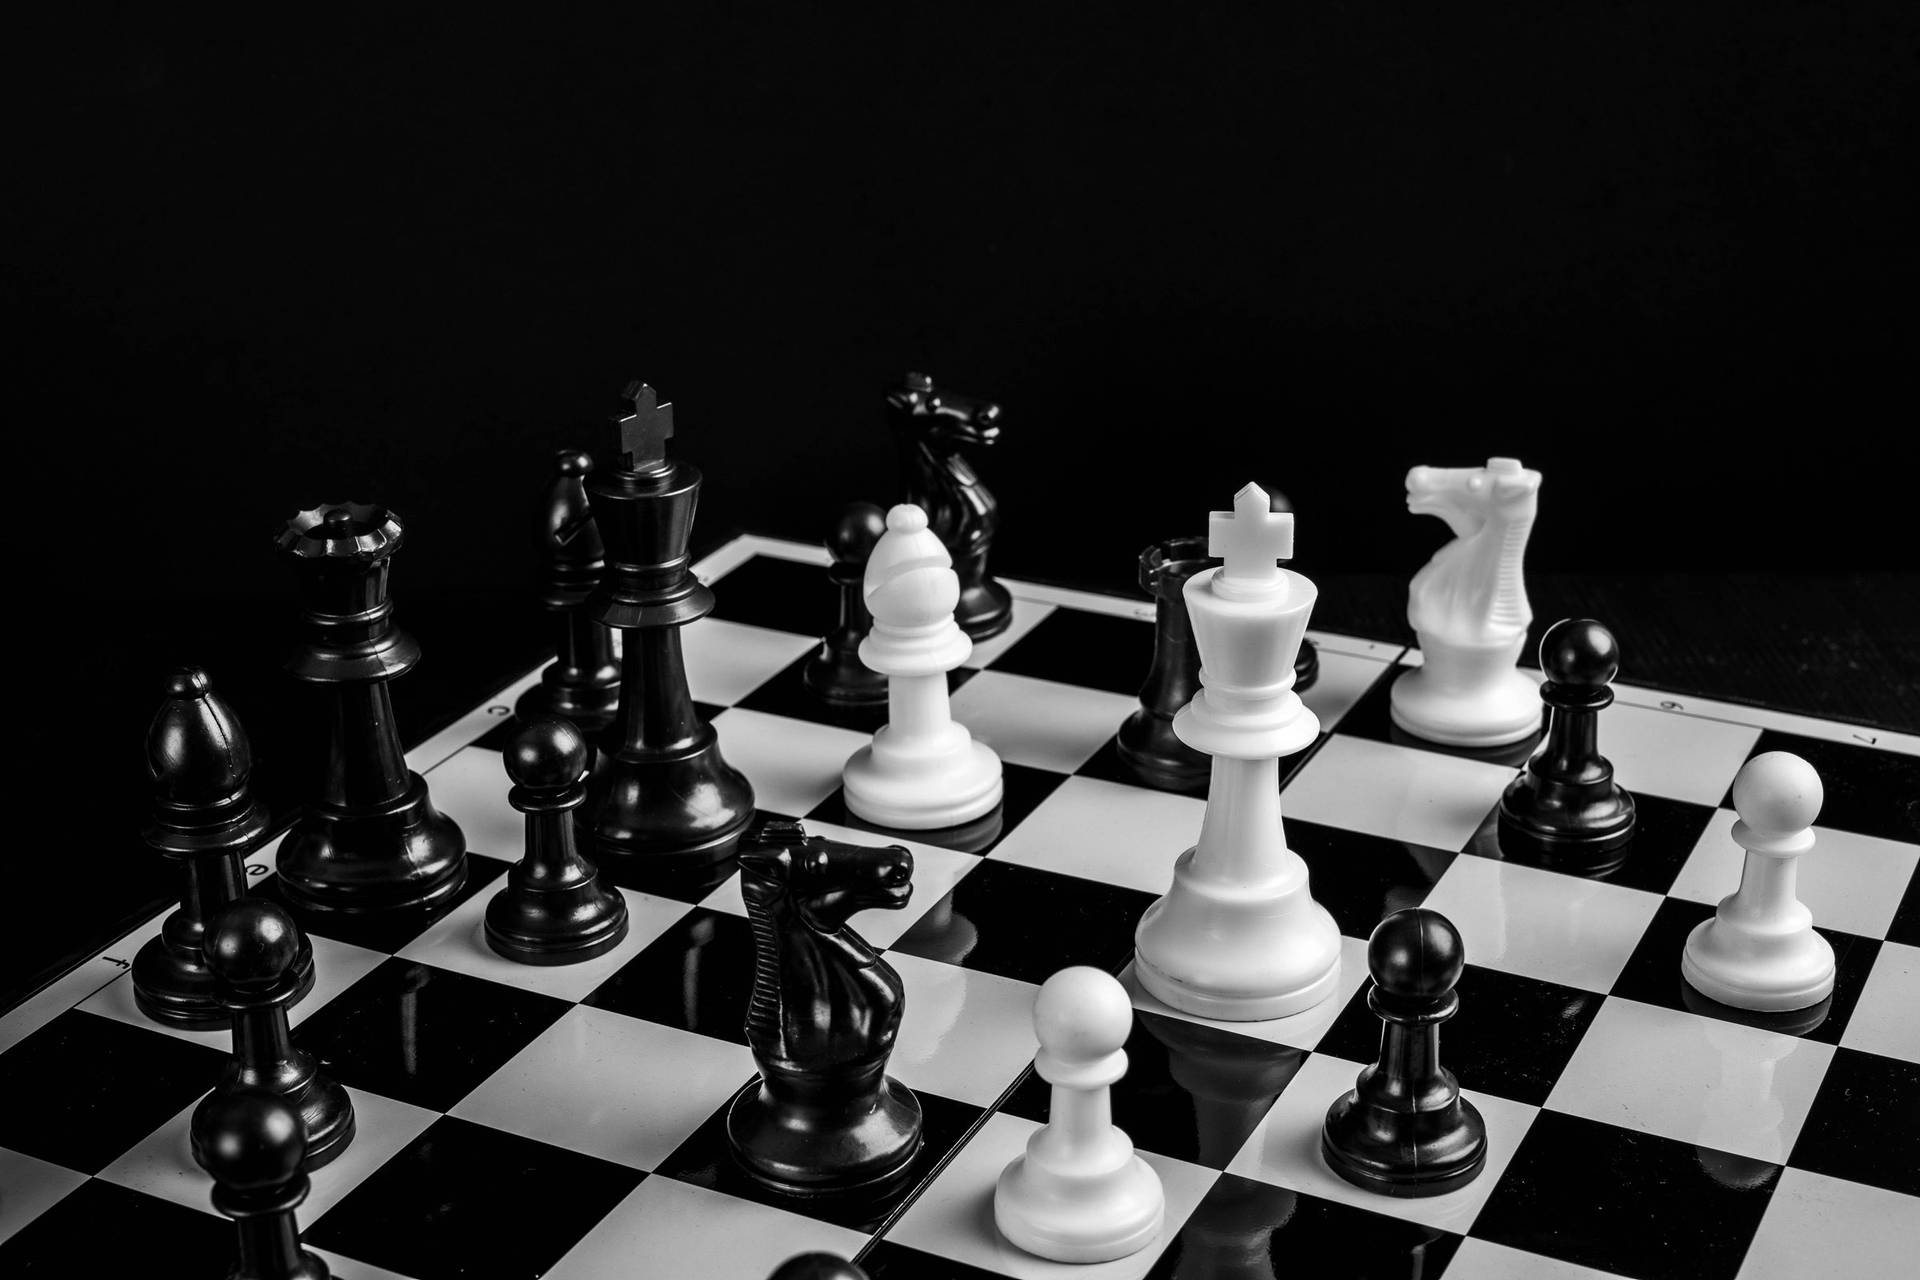 Caption: Engaging Mind Games: Black And White Plastic Chess Pieces On The Board Background